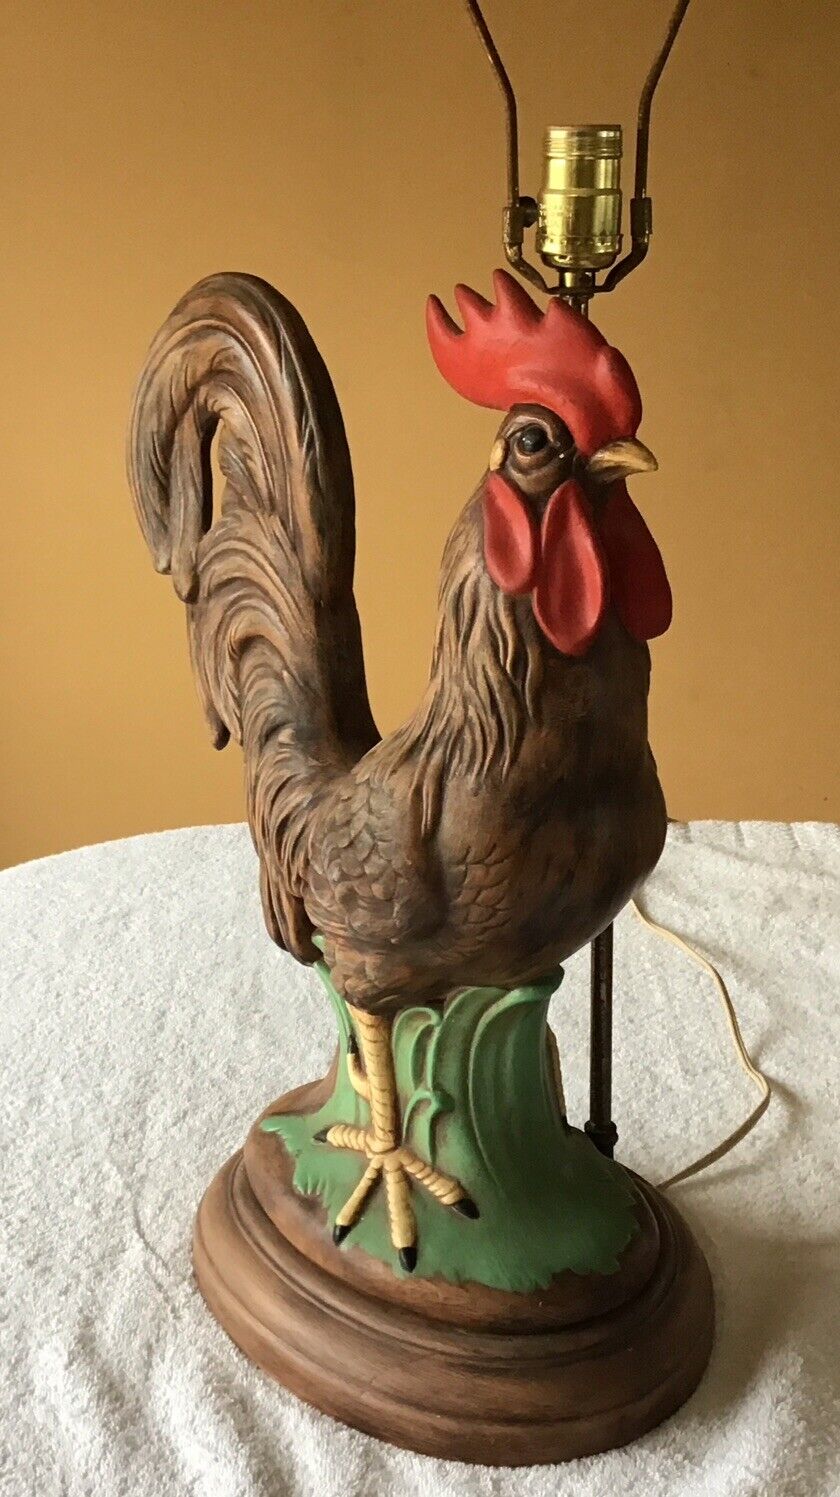 Vintage Large Ceramic Rooster Lamp, 17” To Top Of Rooster, 28 1/2” Total Height